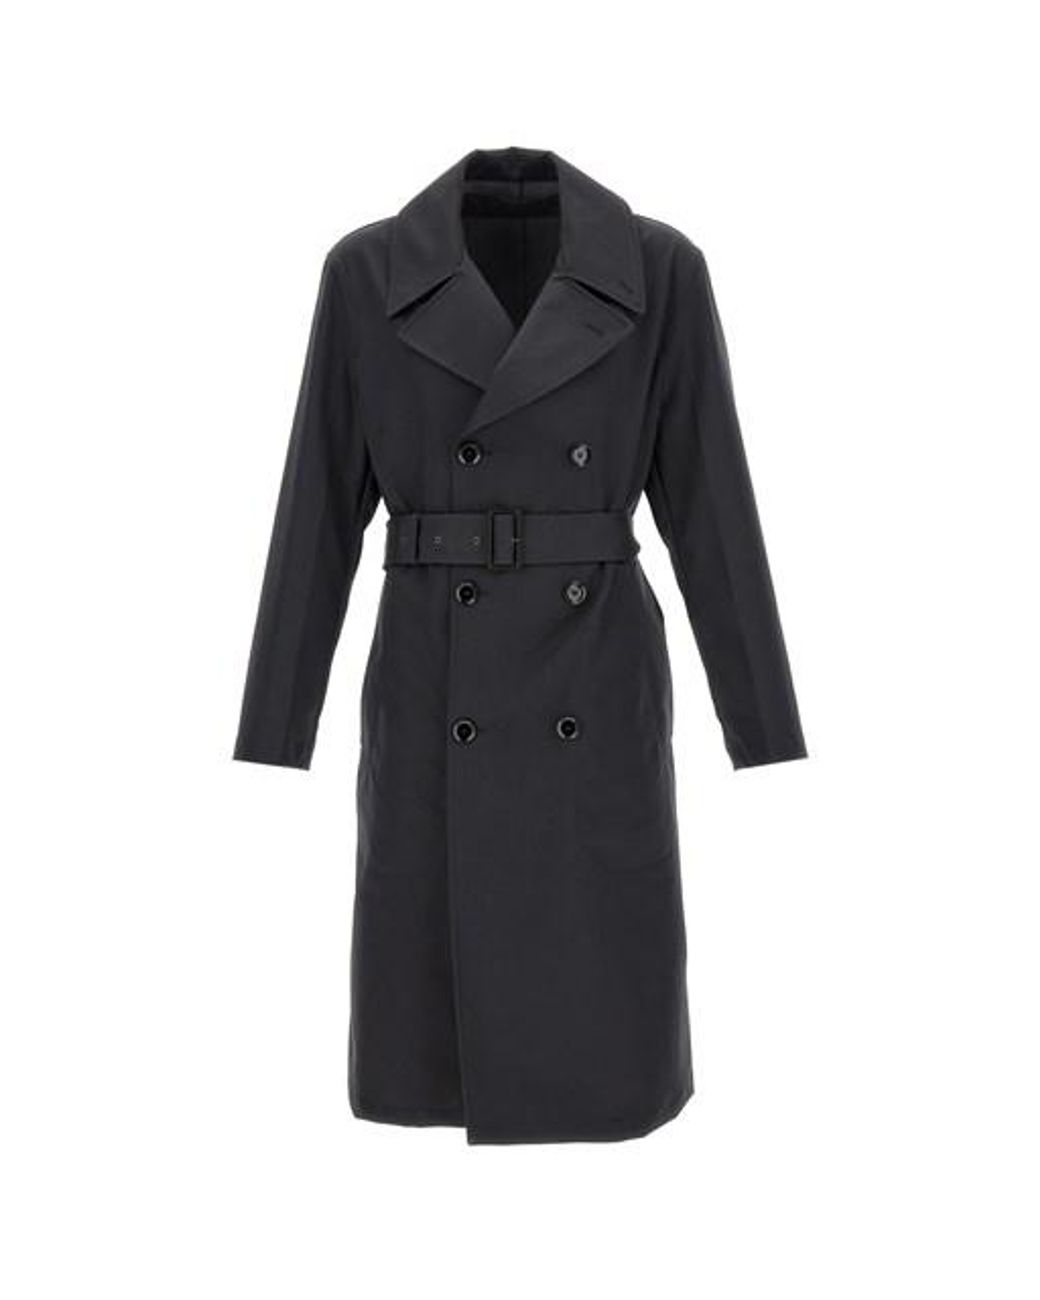 Lemaire 'military' Trench Coat in Black for Men | Lyst